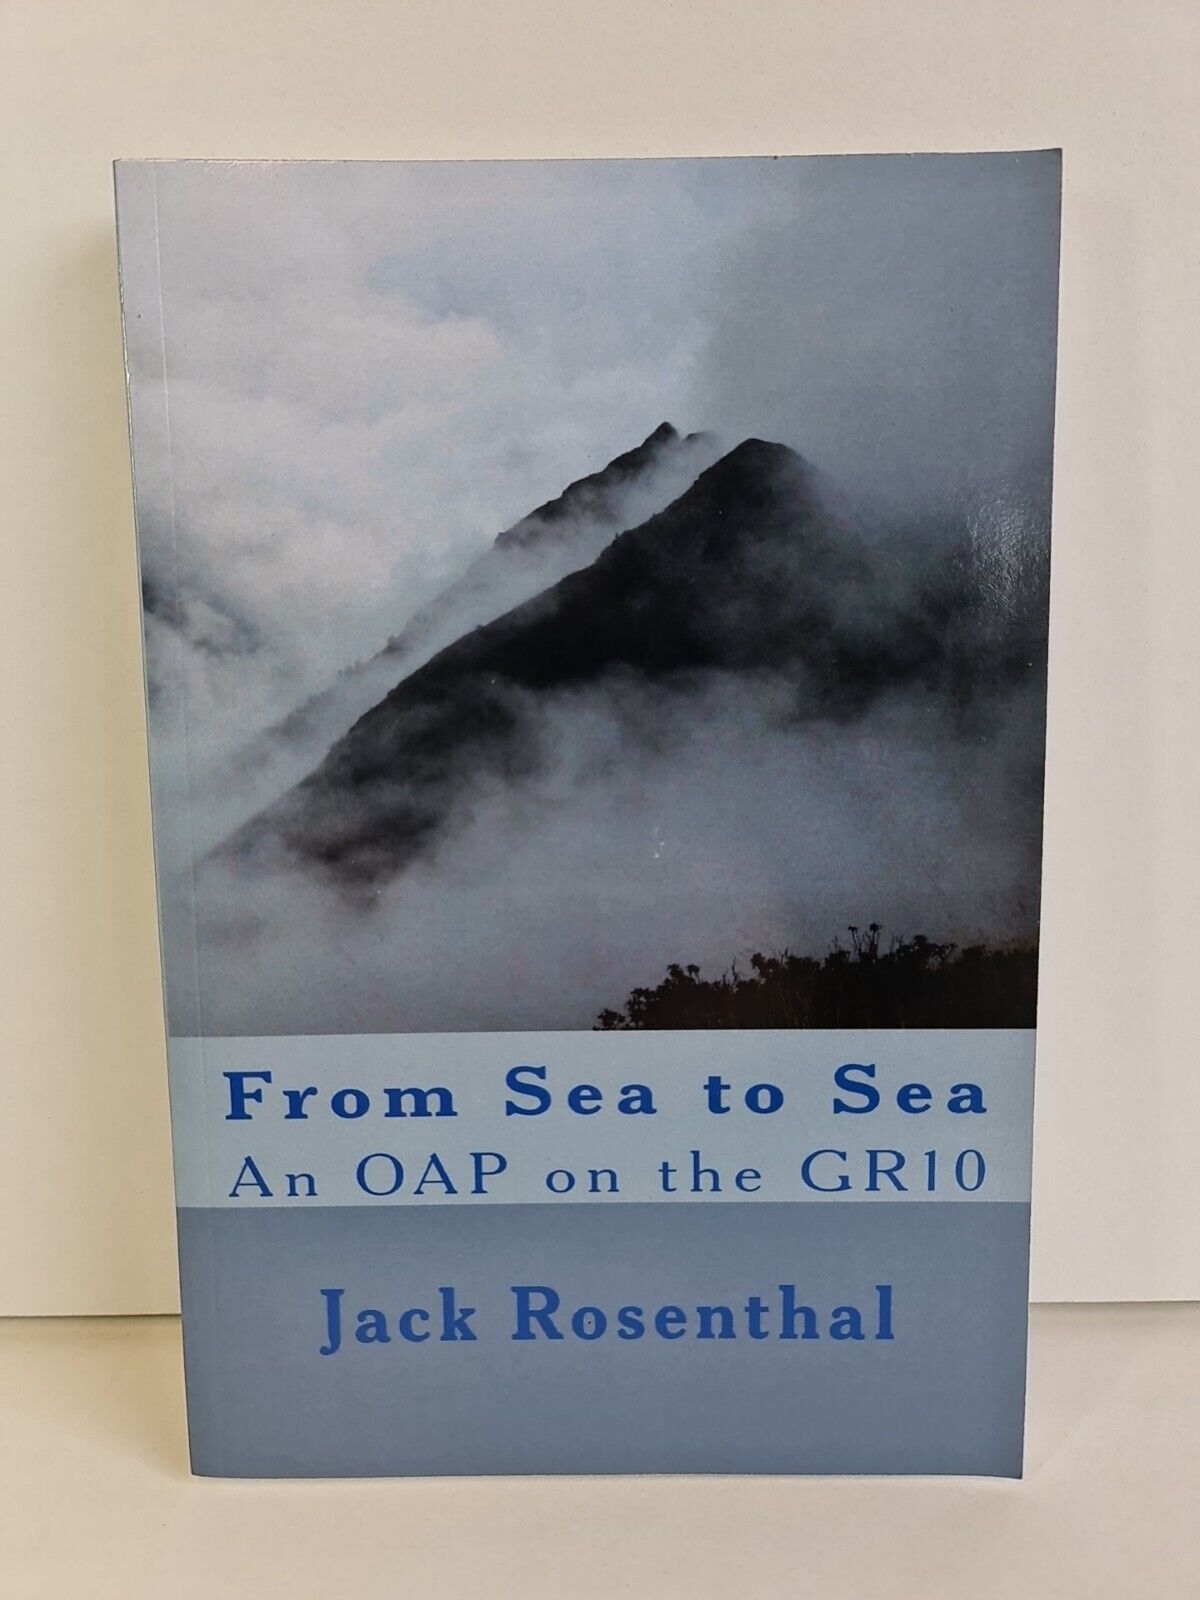 From Sea to Sea: An OAP on the GR10 by Jack Rosenthal (2016)